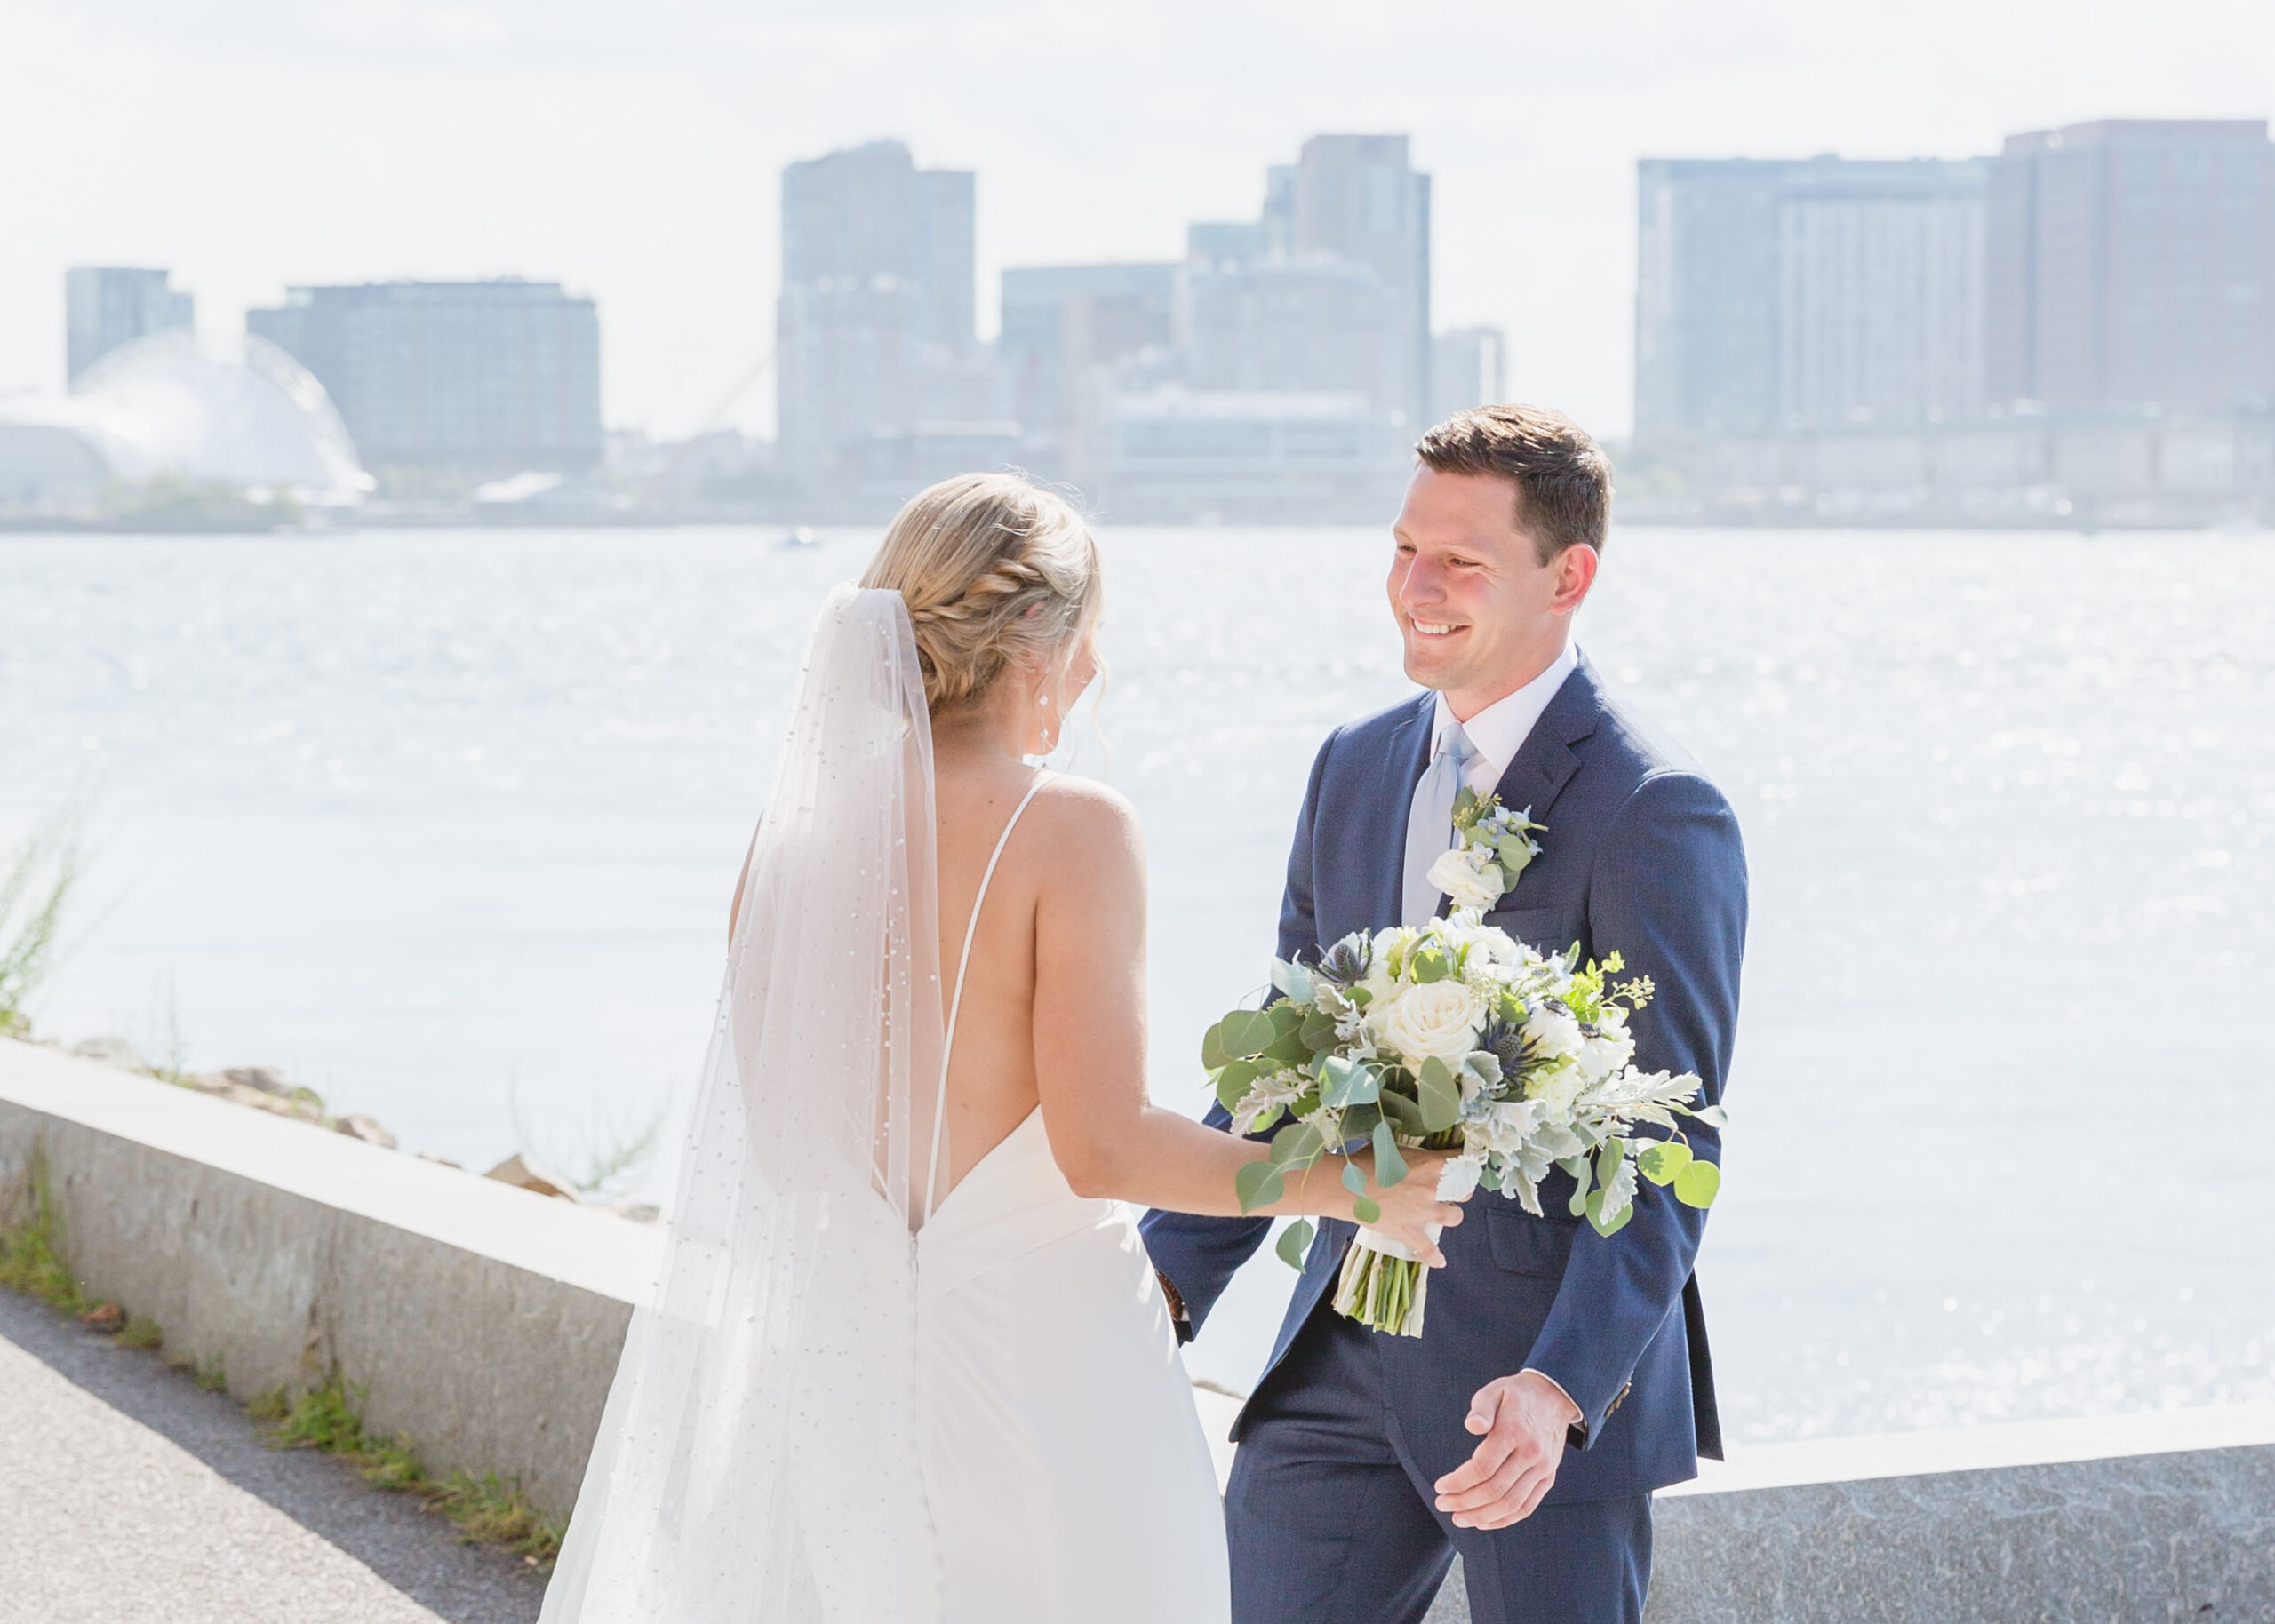 Couple shares a first look with the Boston skyline in the distance at the Hyatt Regency in Boston, Massachusetts.